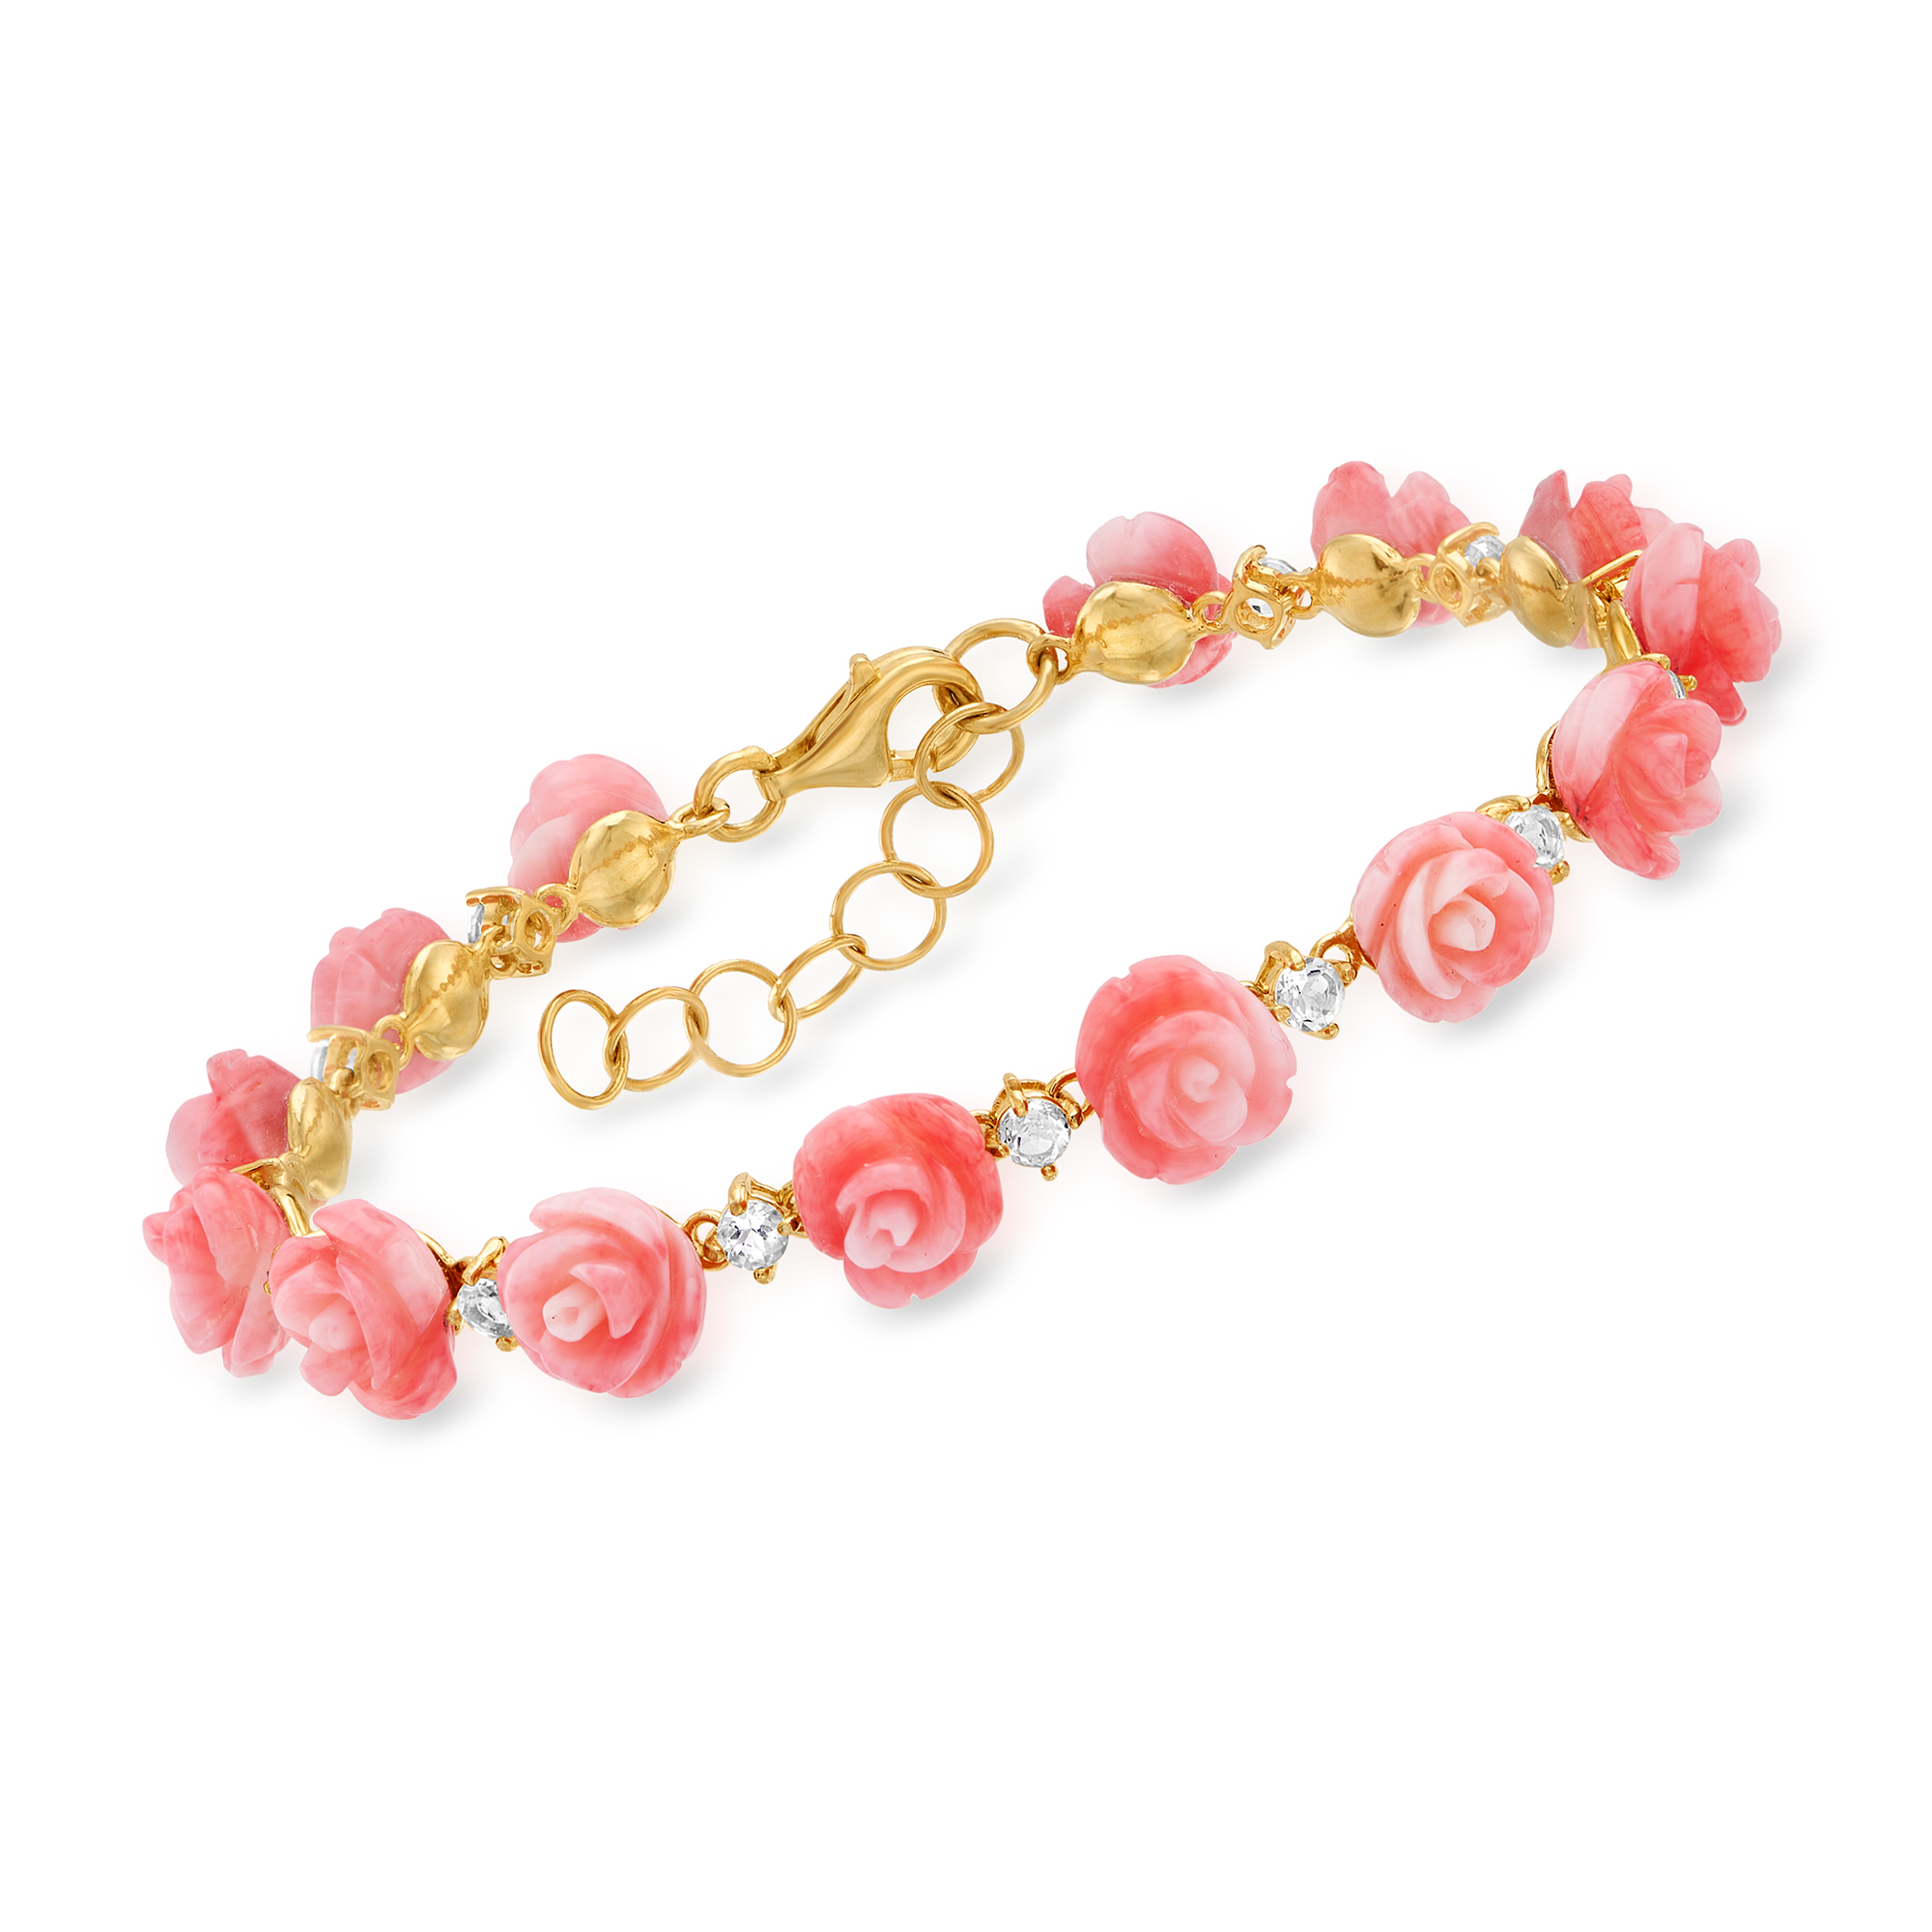 Colour Blossom sun bracelet, pink gold and white mother-of-pearl